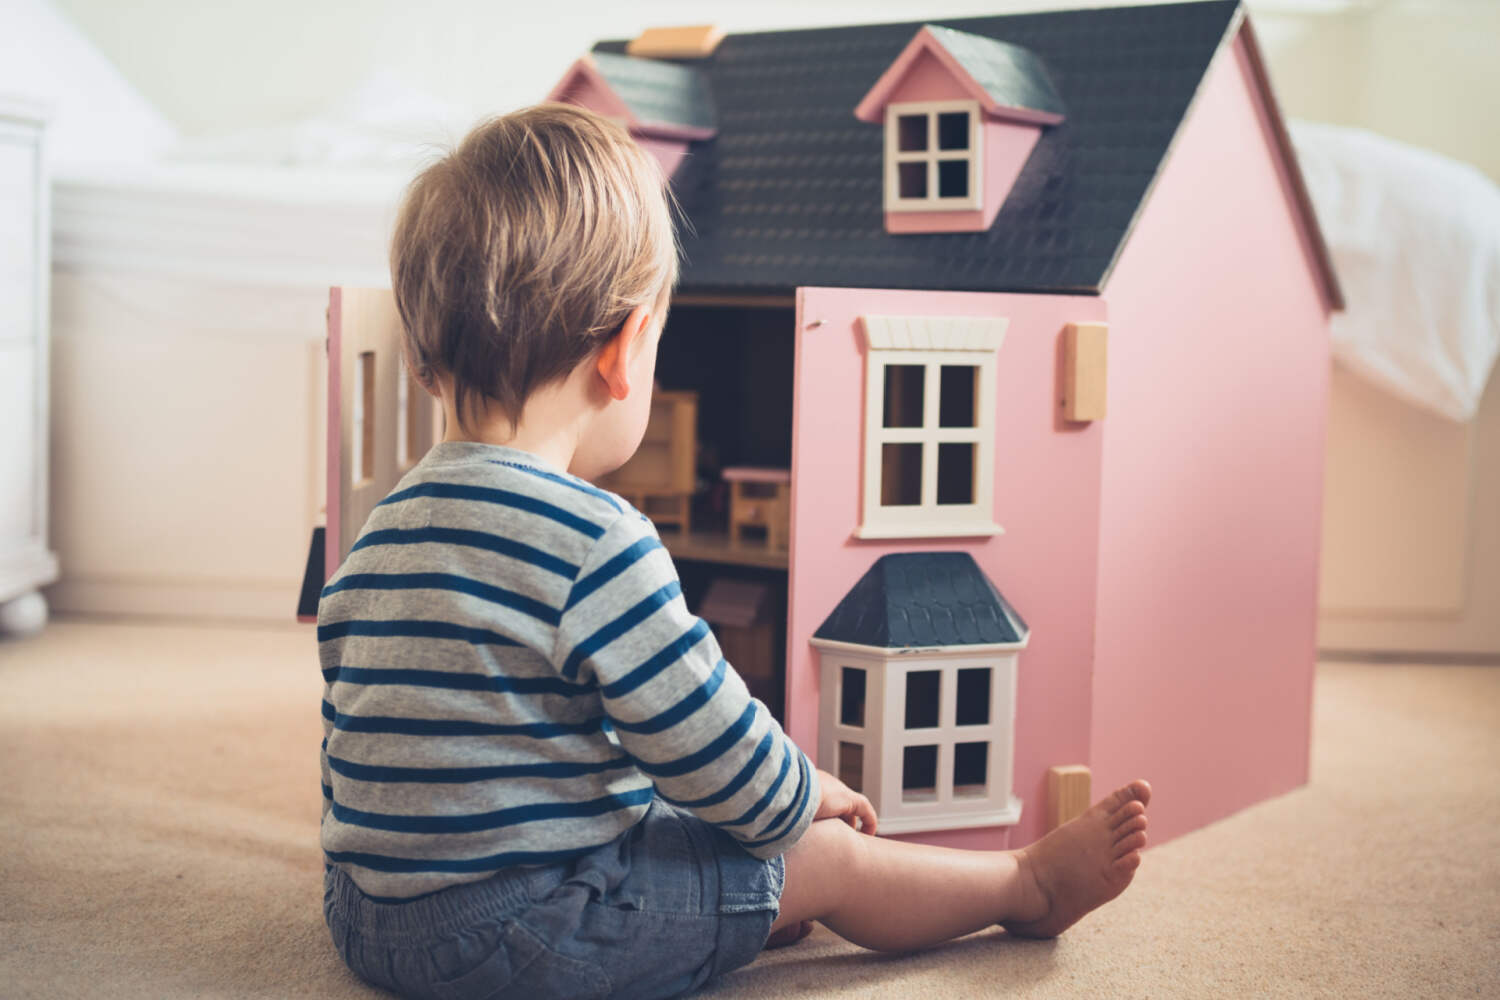 A toddler boy playing with doll house